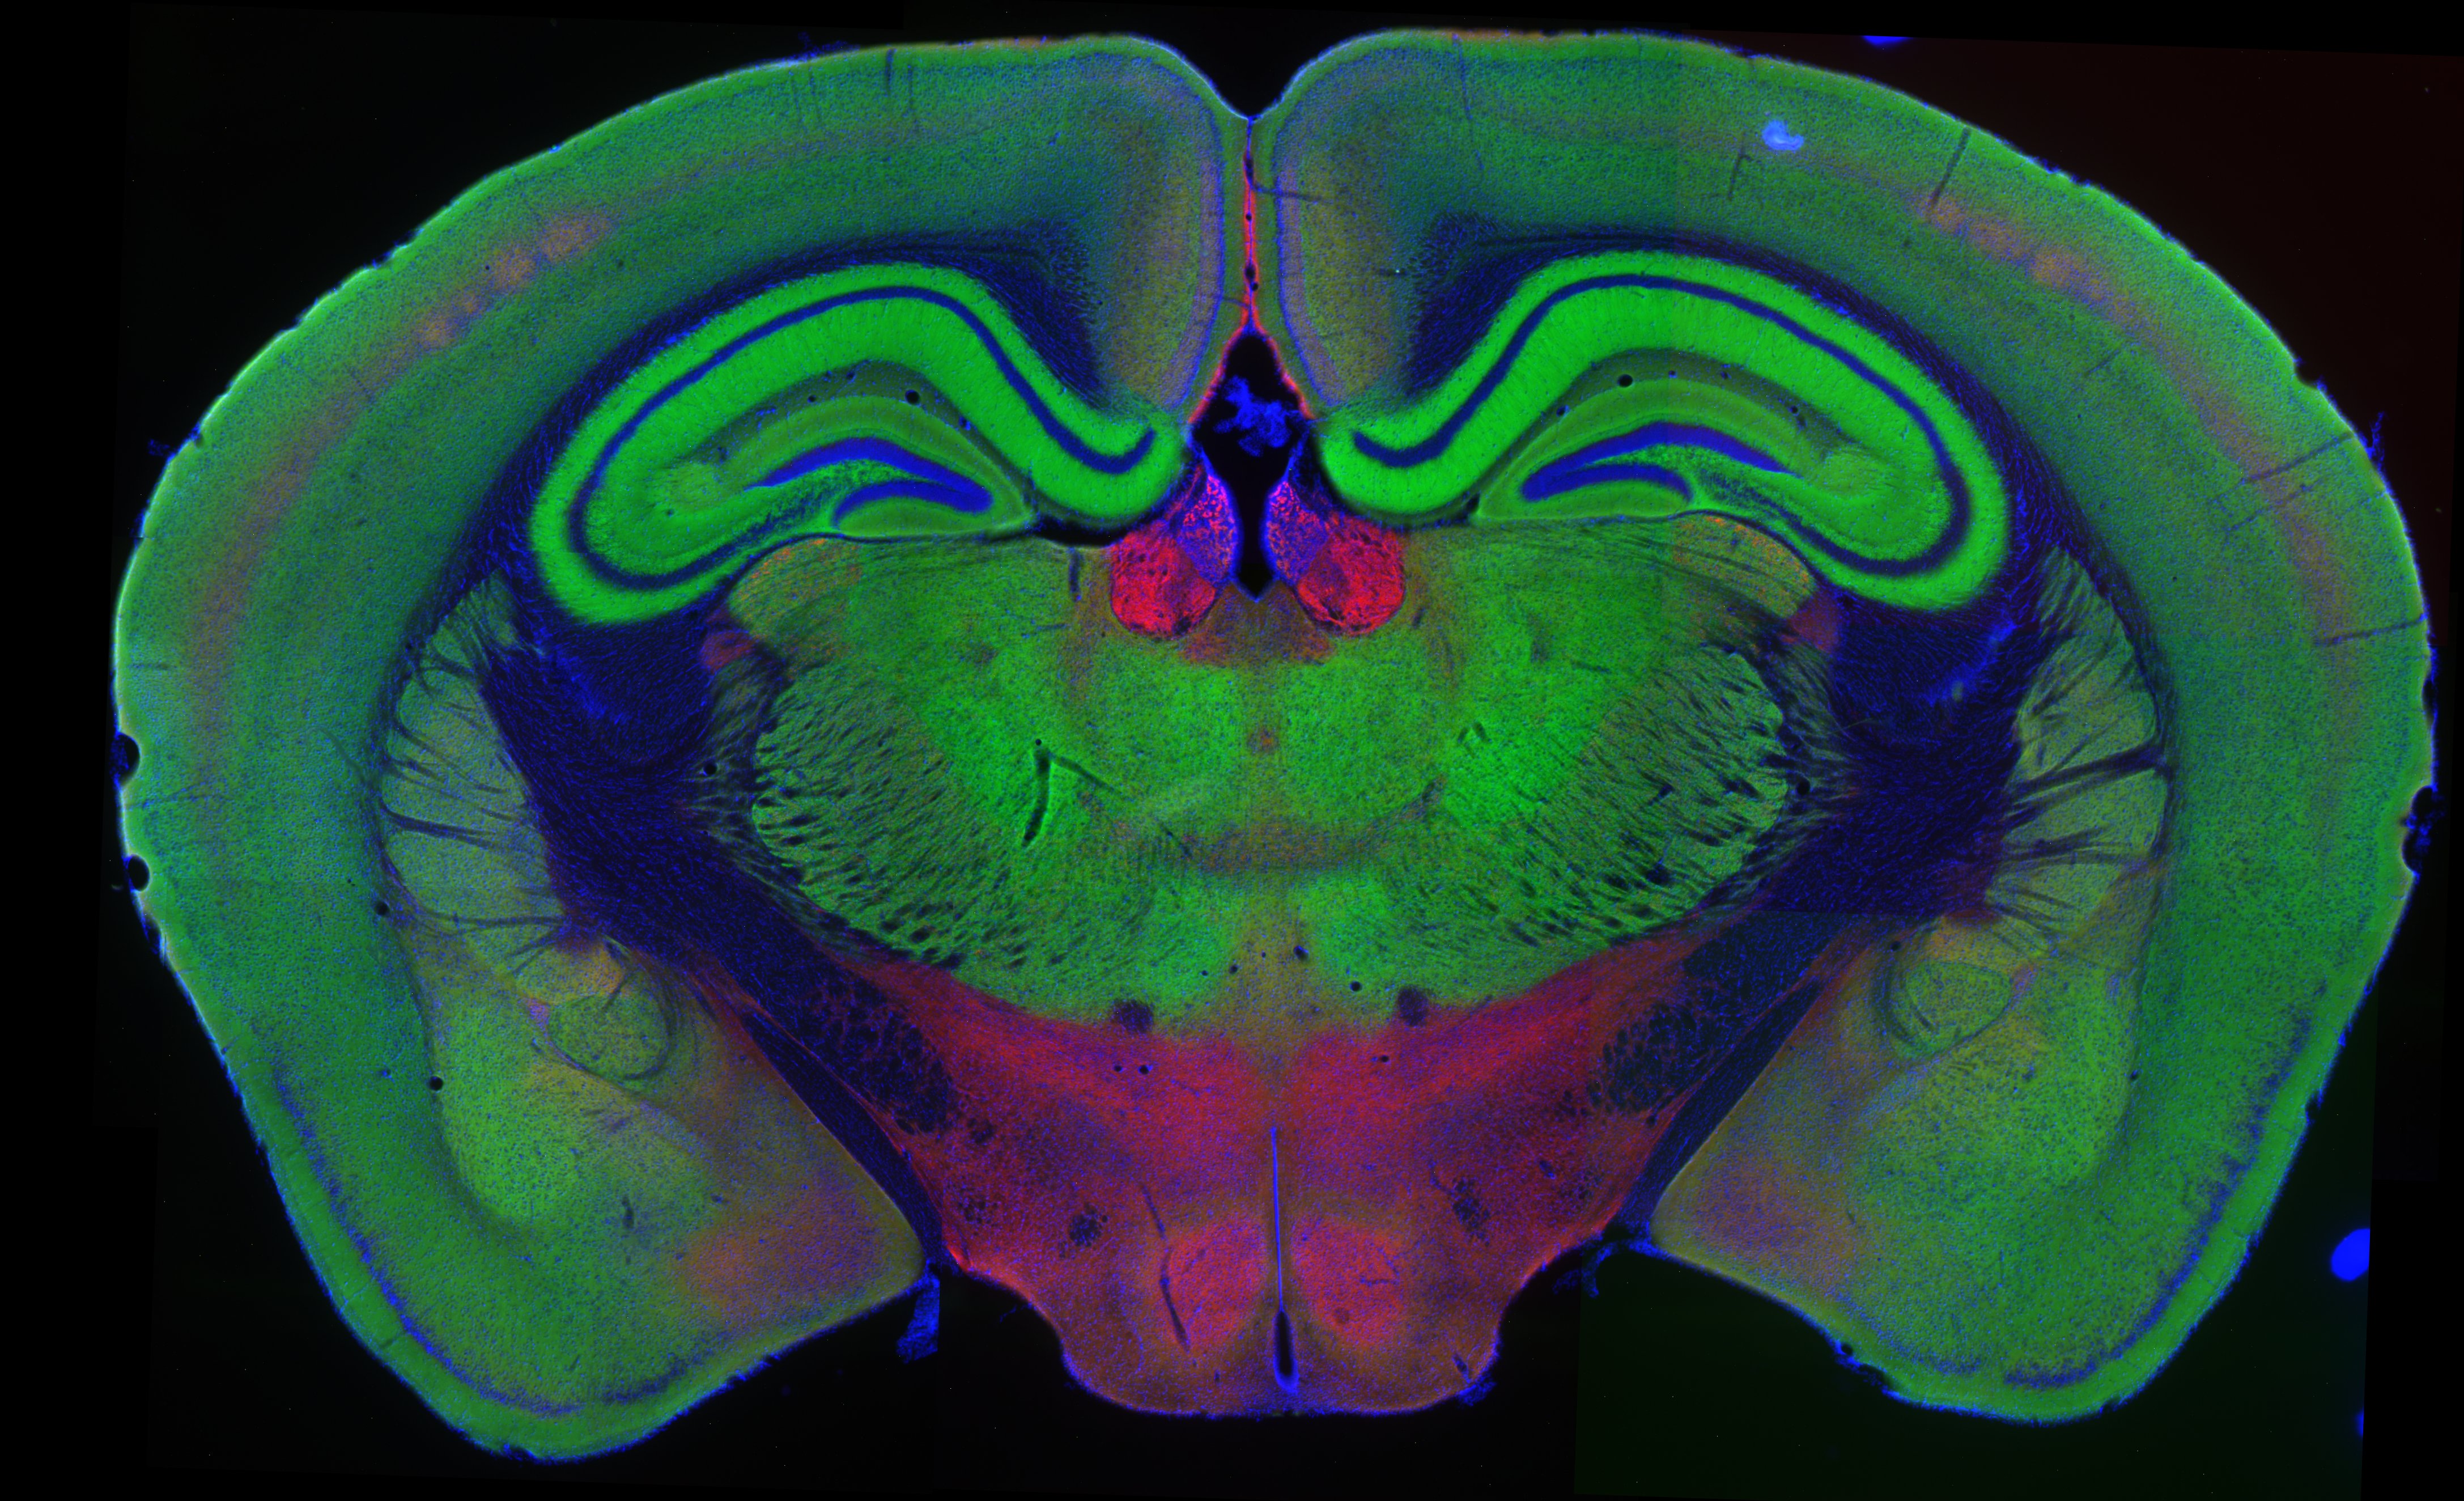 Localization of VGLUT1 and VGLUT in the mouse brain